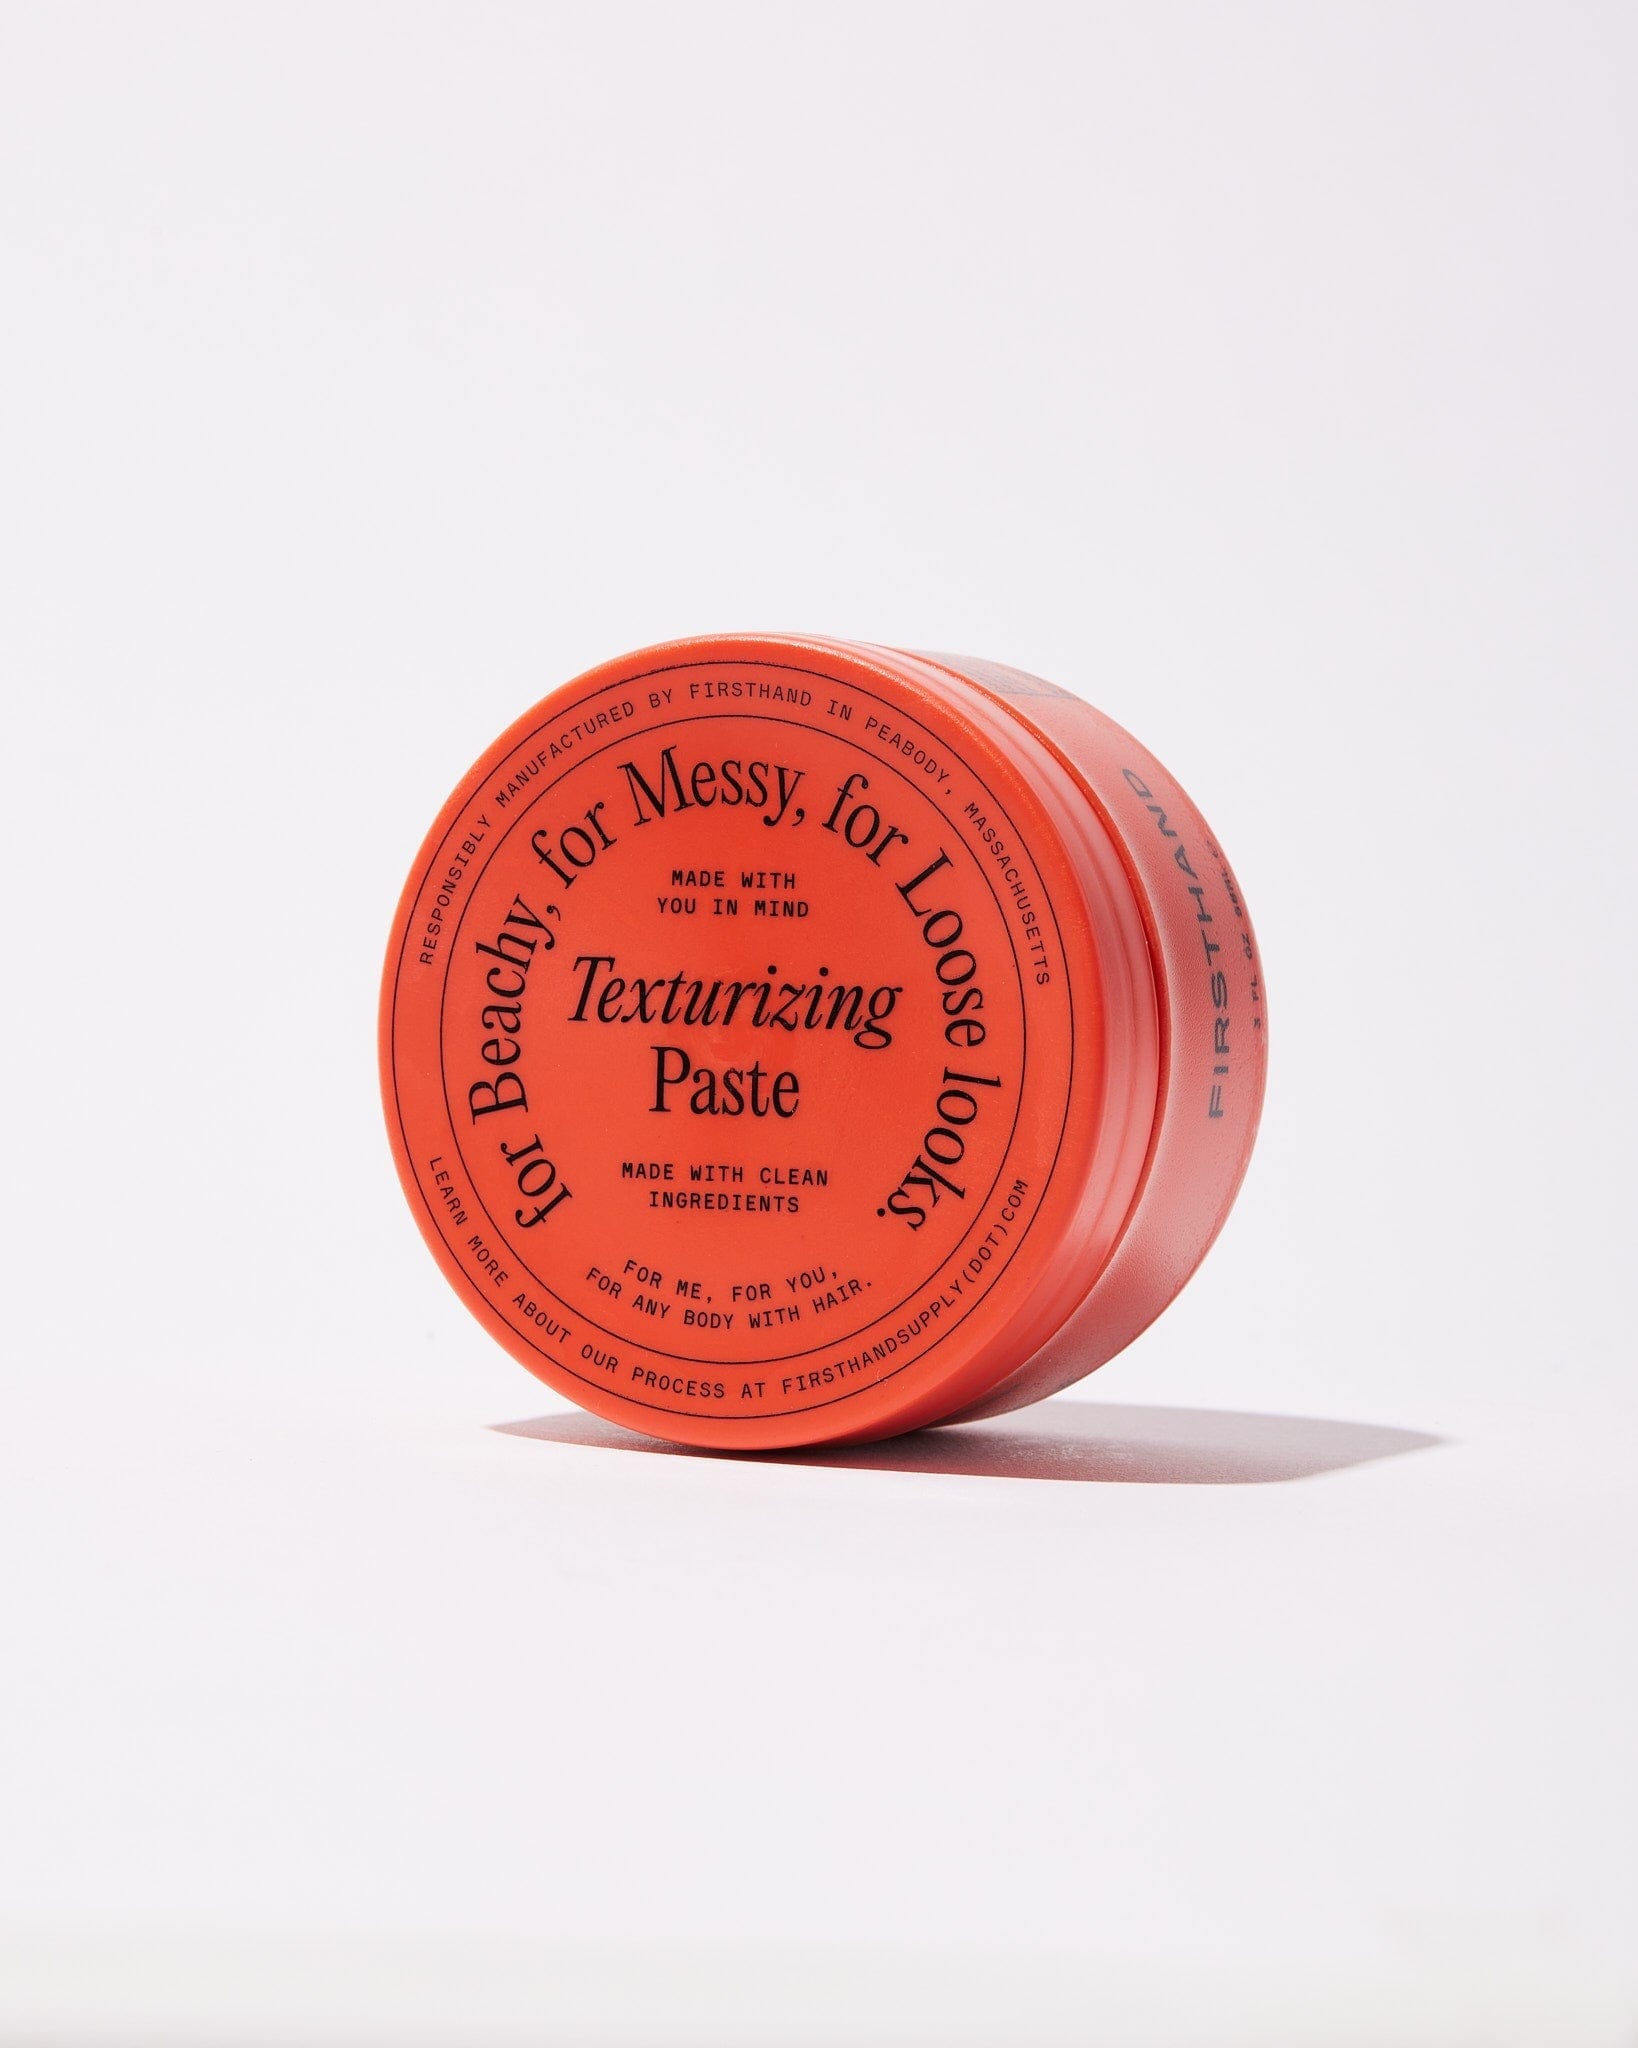 Murray's Superior Hair Dressing Pomade, 3 oz (Pack of 3) Ingredients and  Reviews